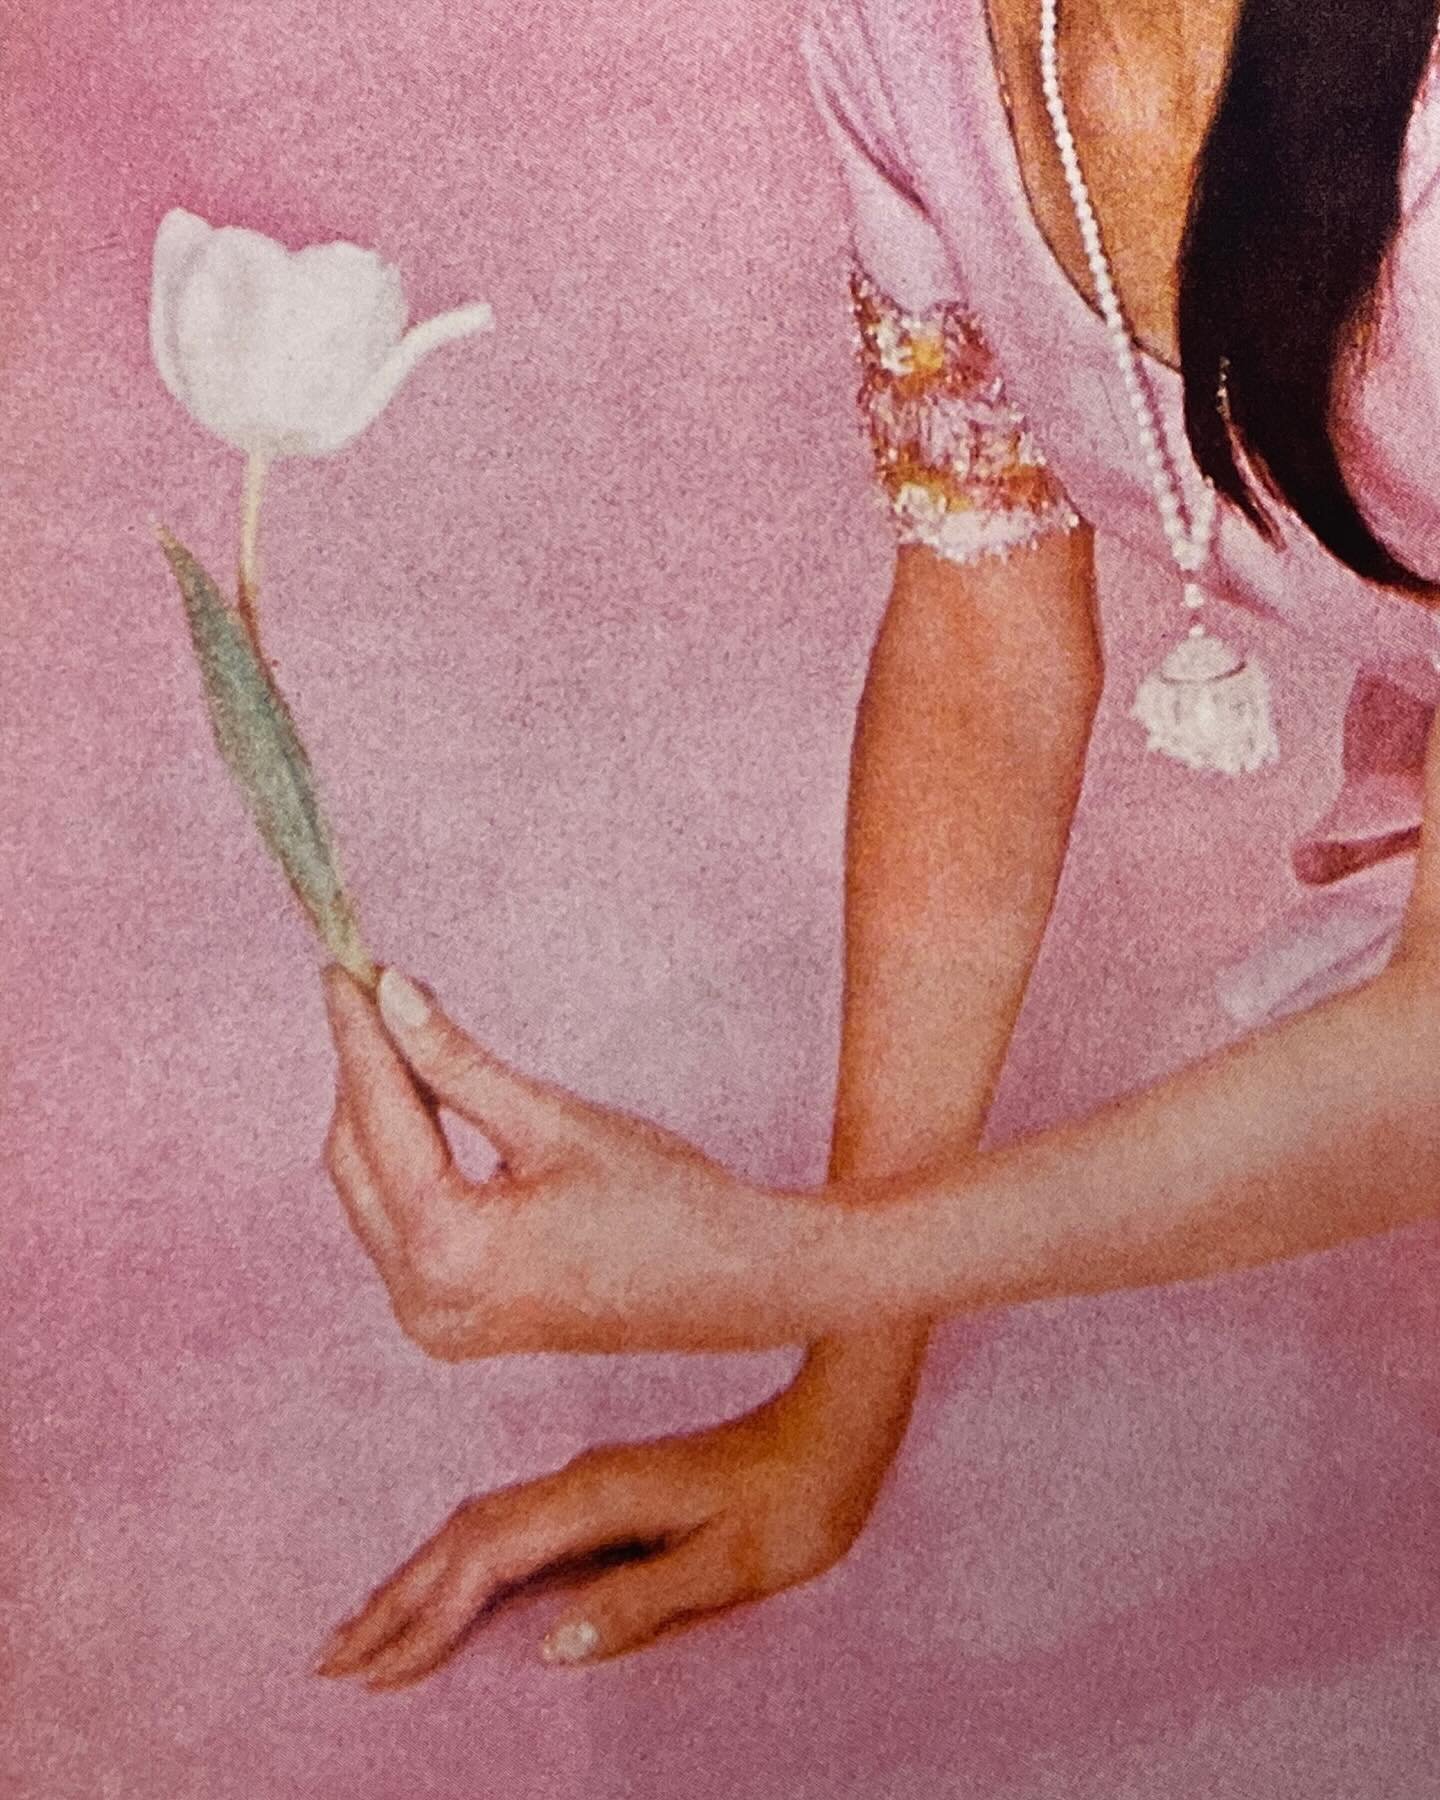 Can you guess what&rsquo;s coming to the website this weekend? 🌷🔨

1. Crop from a Cecil Beaton portrait of Audrey Hepburn from 1964
2. My Lady Tulip, illustration by H. Marsh Lambert from the early to mid 1900&rsquo;s
3. Page from Imported and Nati